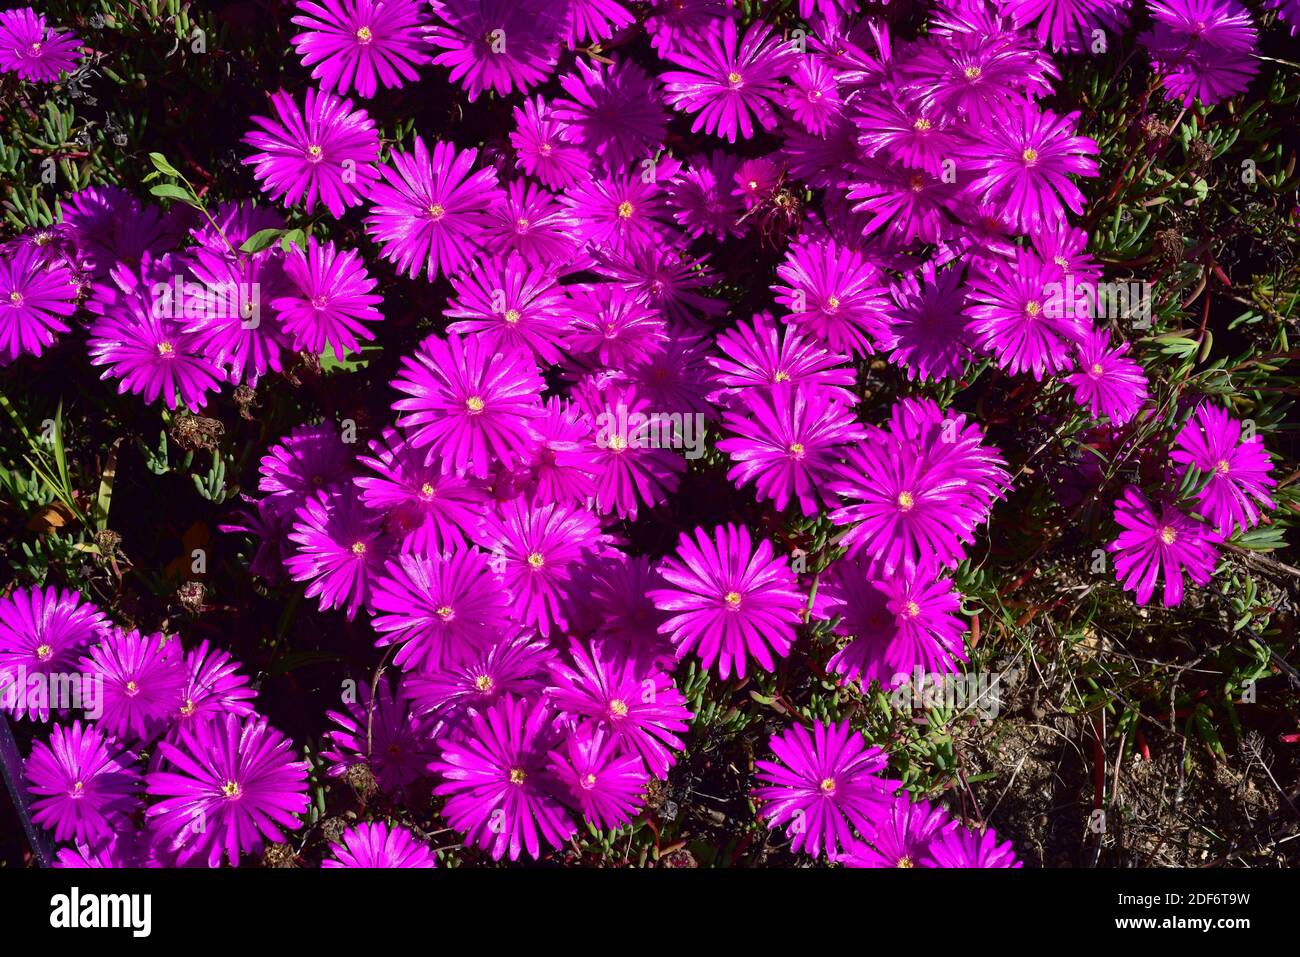 Darling lampranthus (Lampranthus amoenus) is a creeping succulent plant native to southern Africa. Flowers detail. Stock Photo